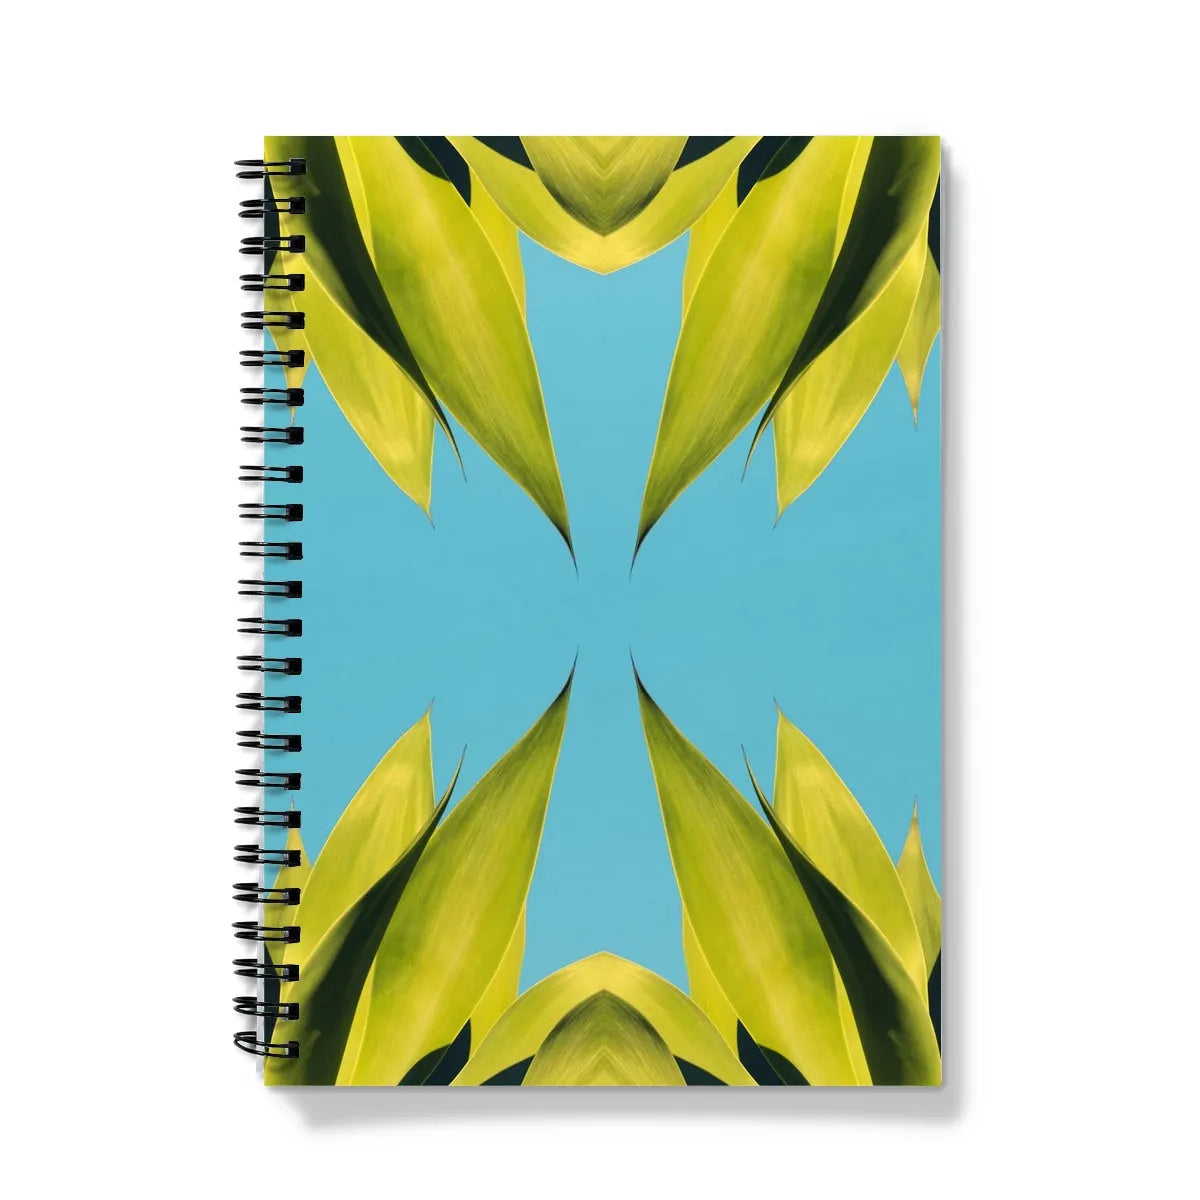 In Bloom Notebook - A5 / A5 - Lined Paper - Notebooks & Notepads - Aesthetic Art